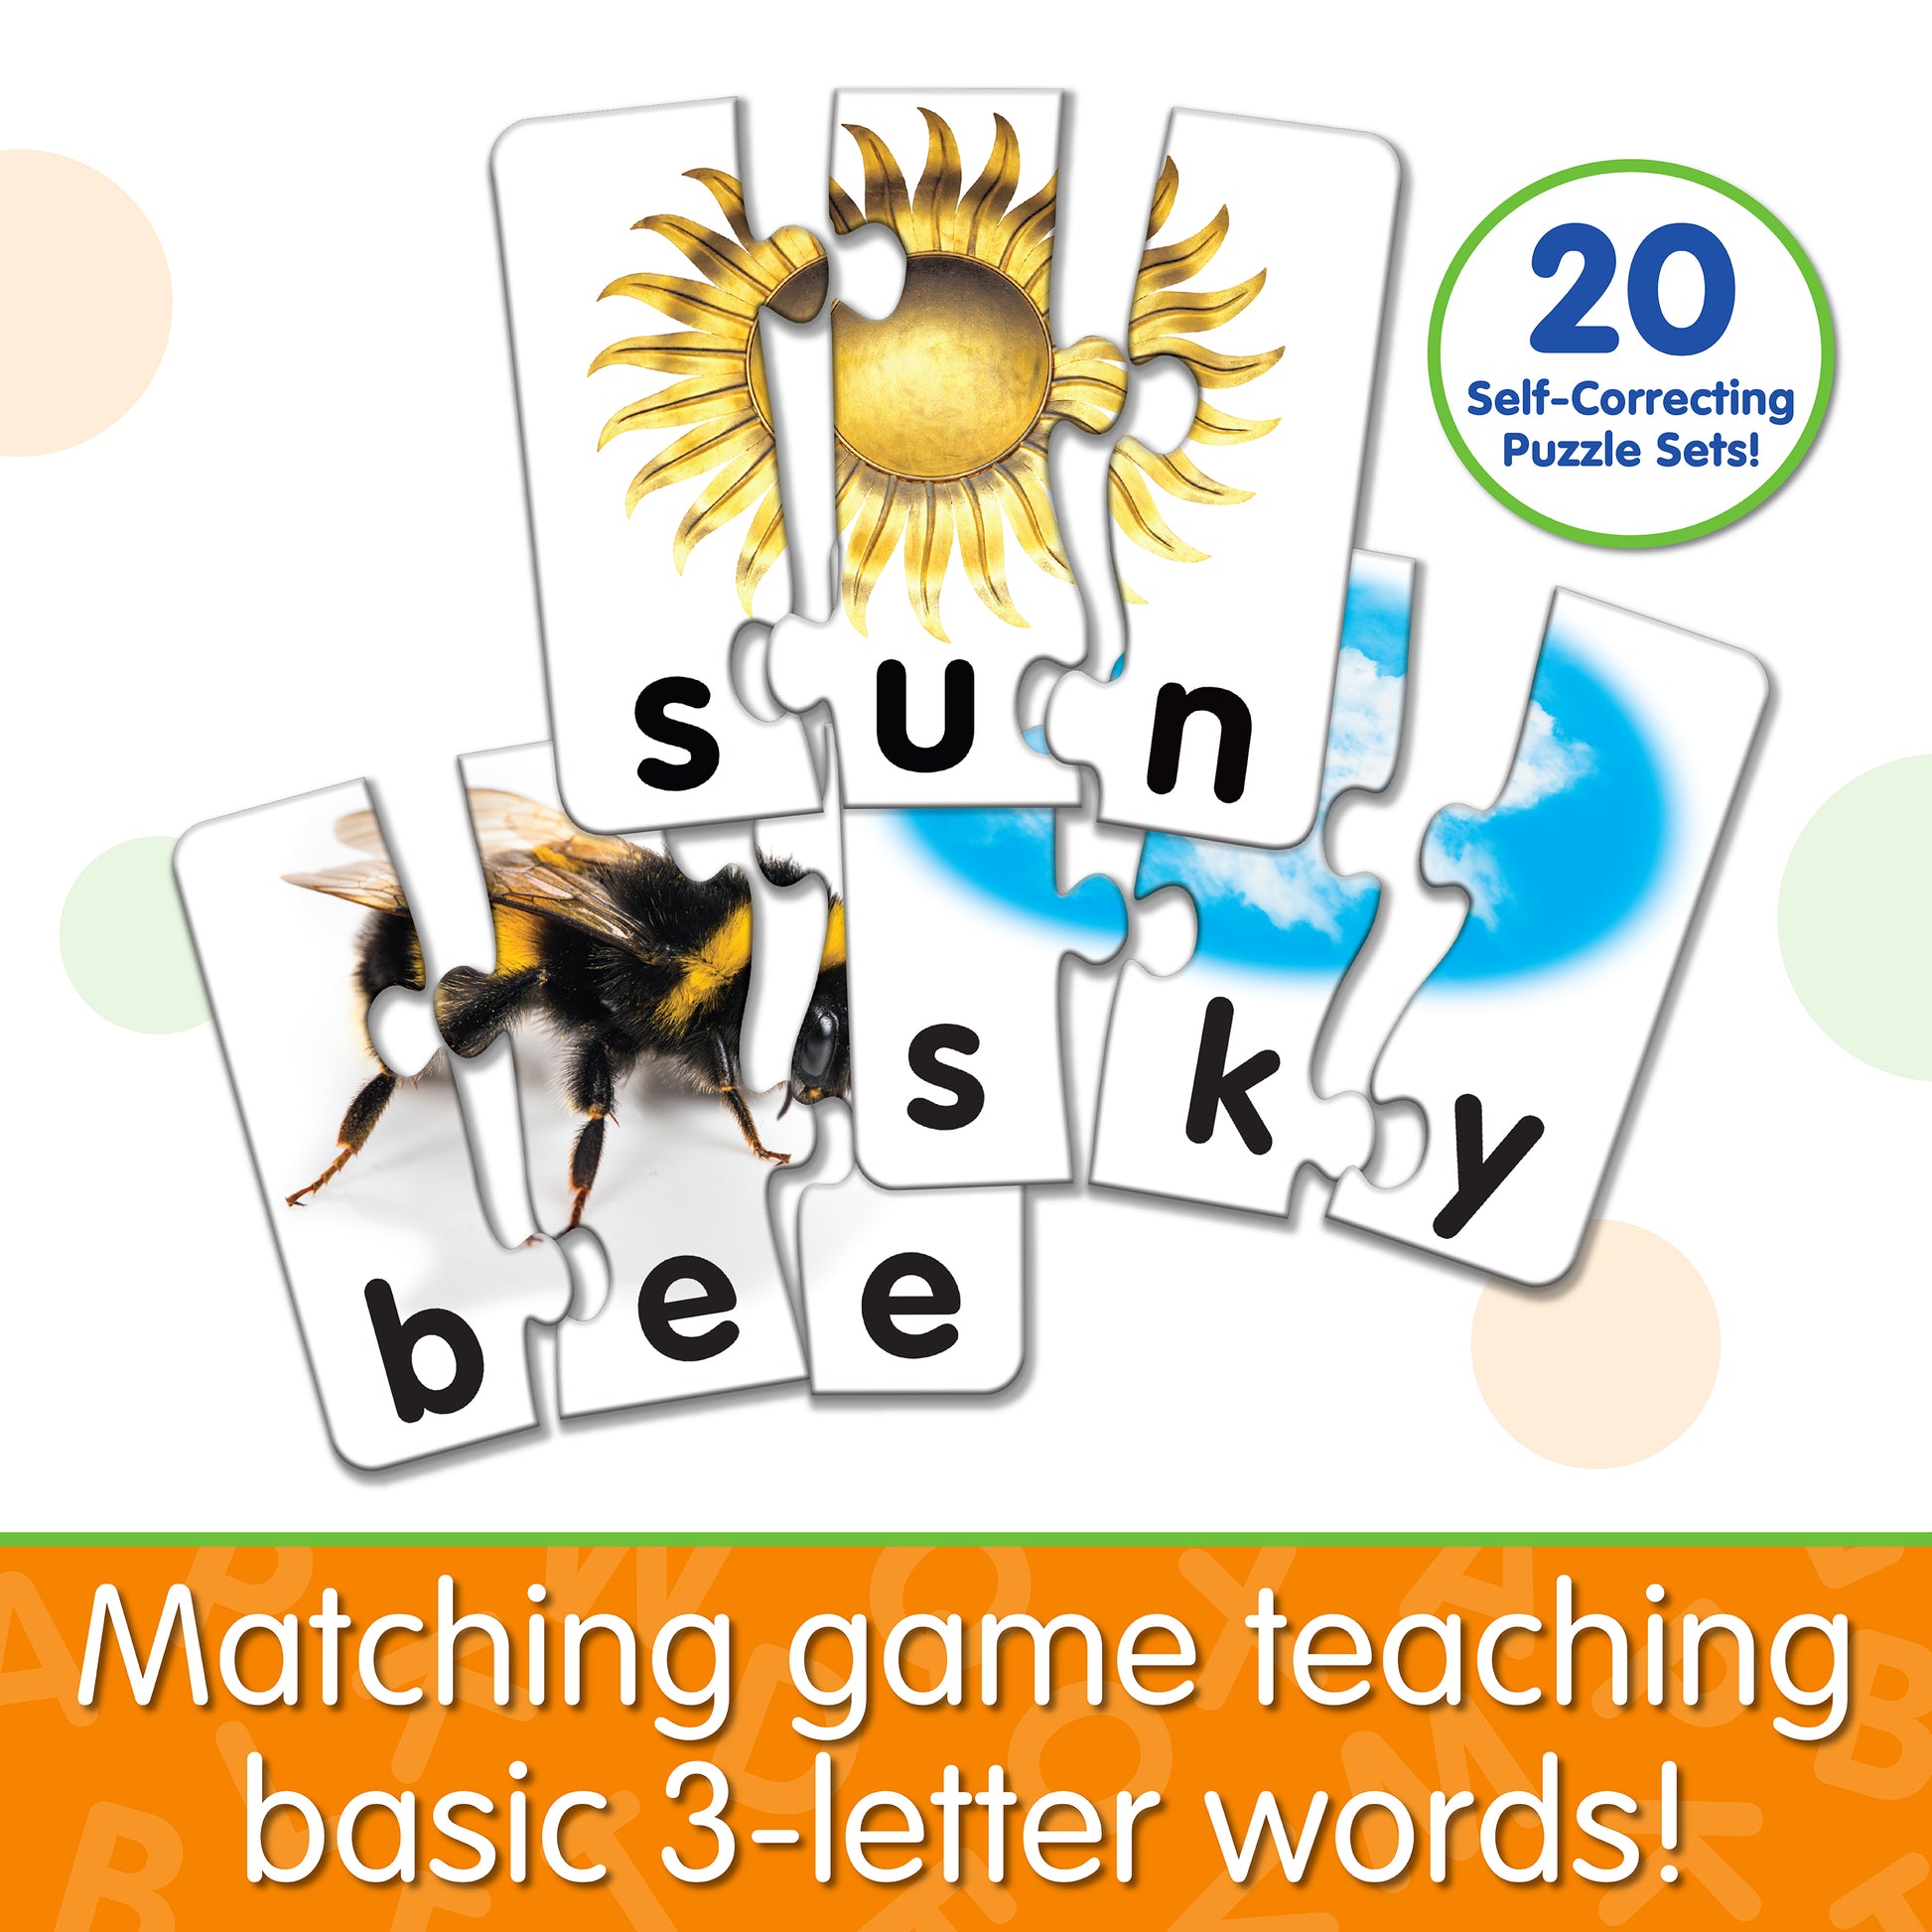 Infographic about Match It - 3 Letter Words that says, "Matching game teaching basic 3-letter words!"